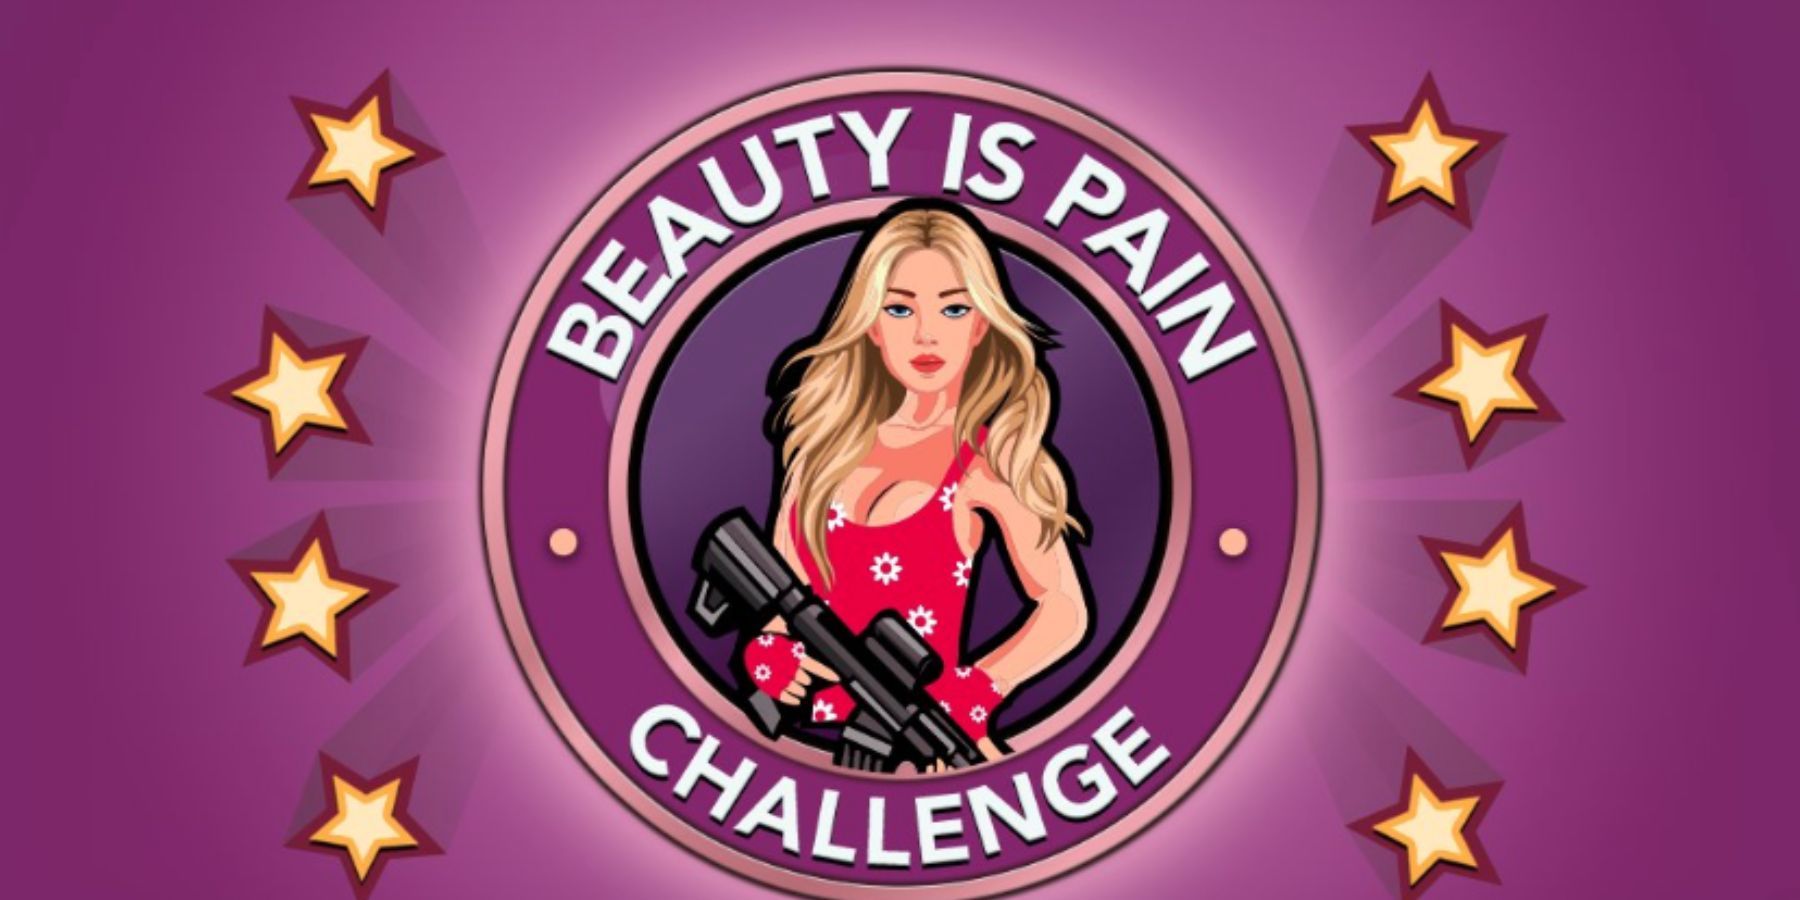 beauty is pain challenge bitlife